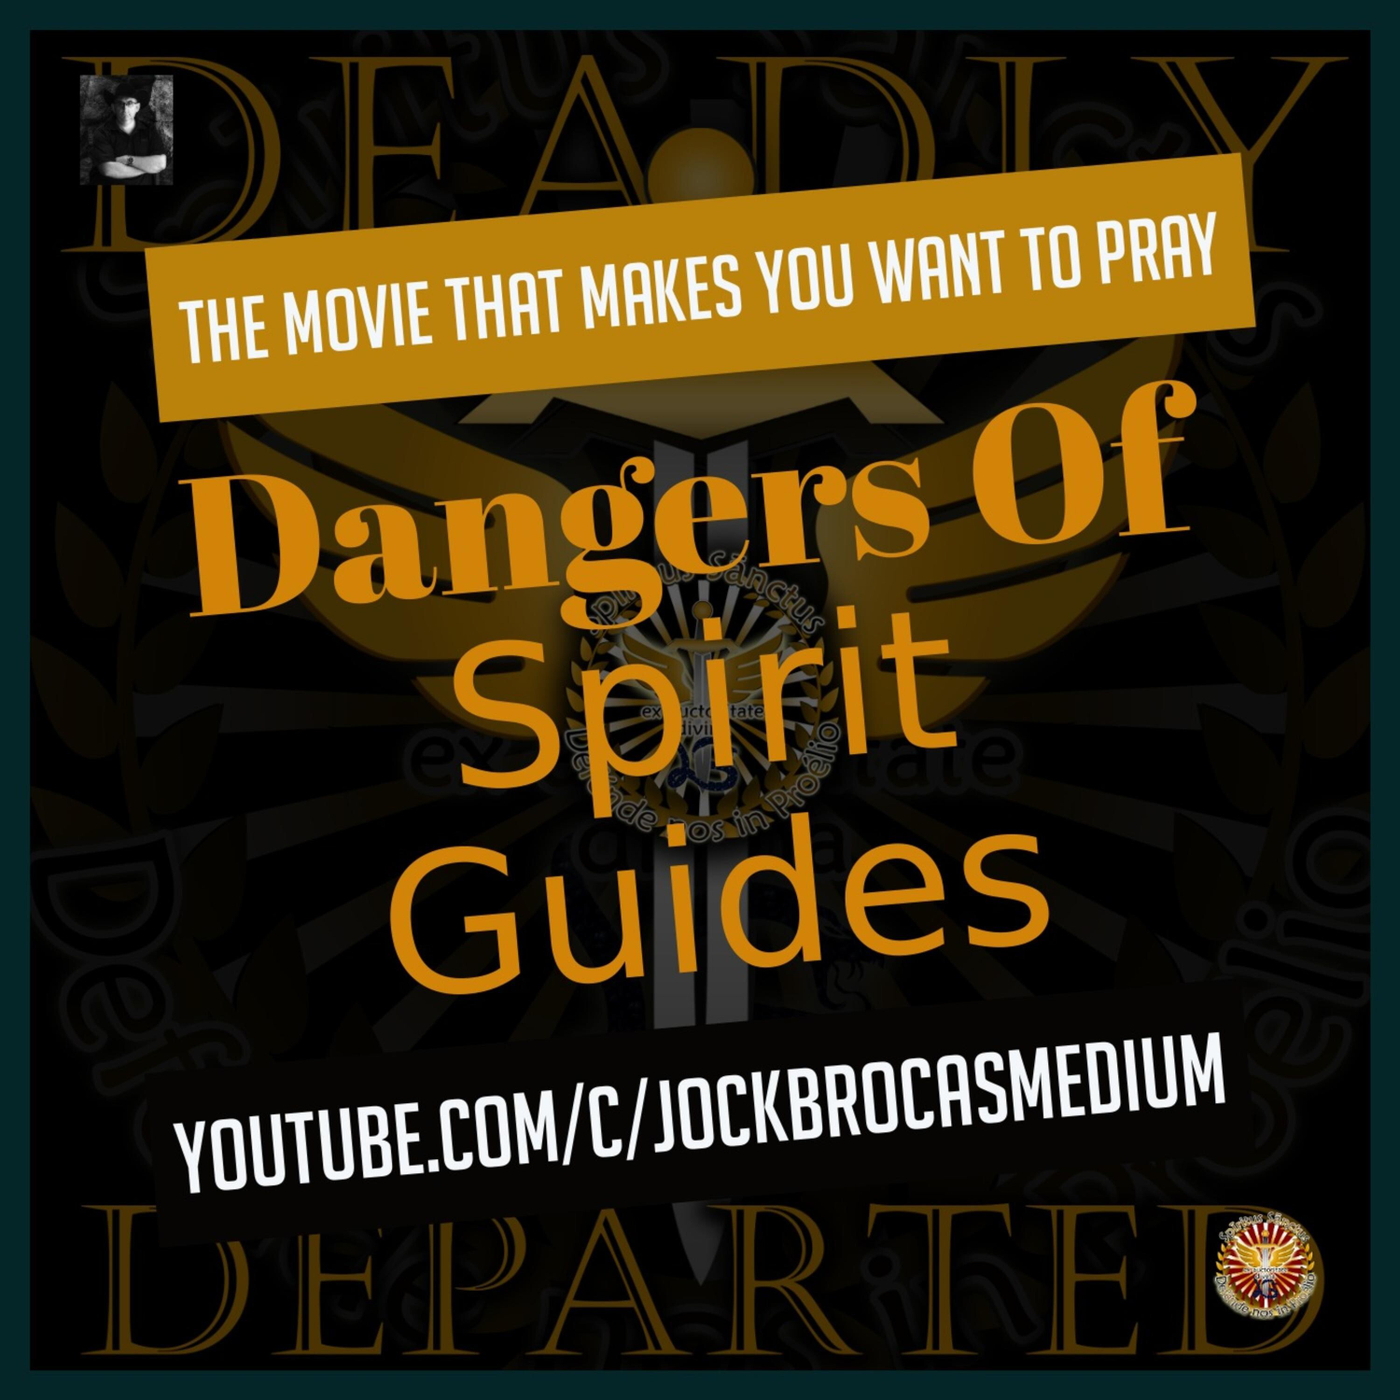 The Dangers Of Spirit Guides